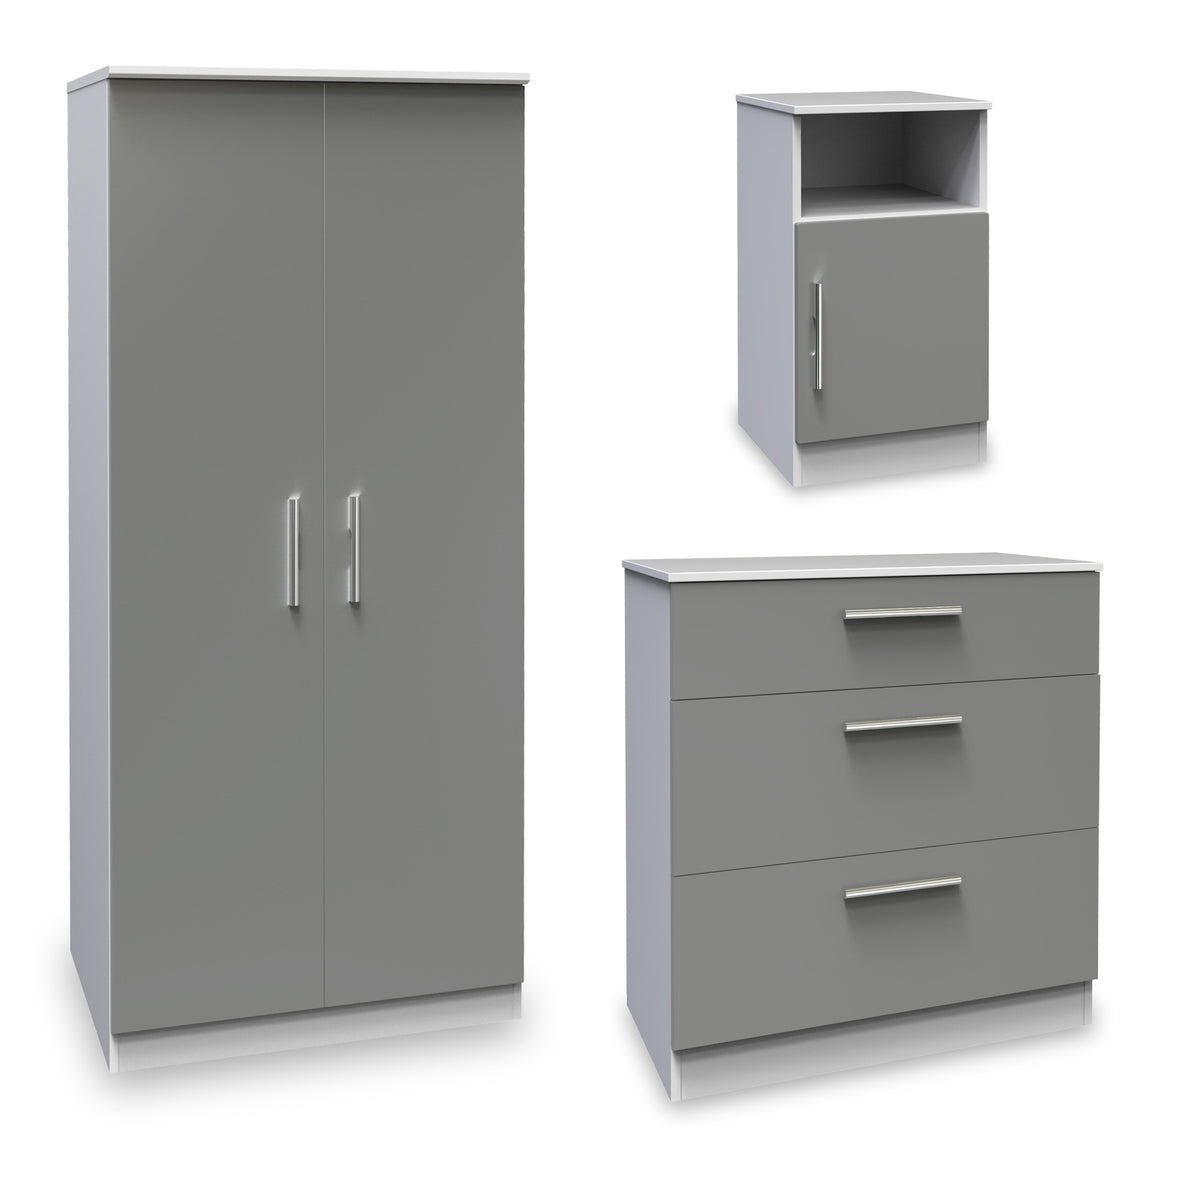 Blakely Grey and White 3 Piece Bedroom Set from Roseland